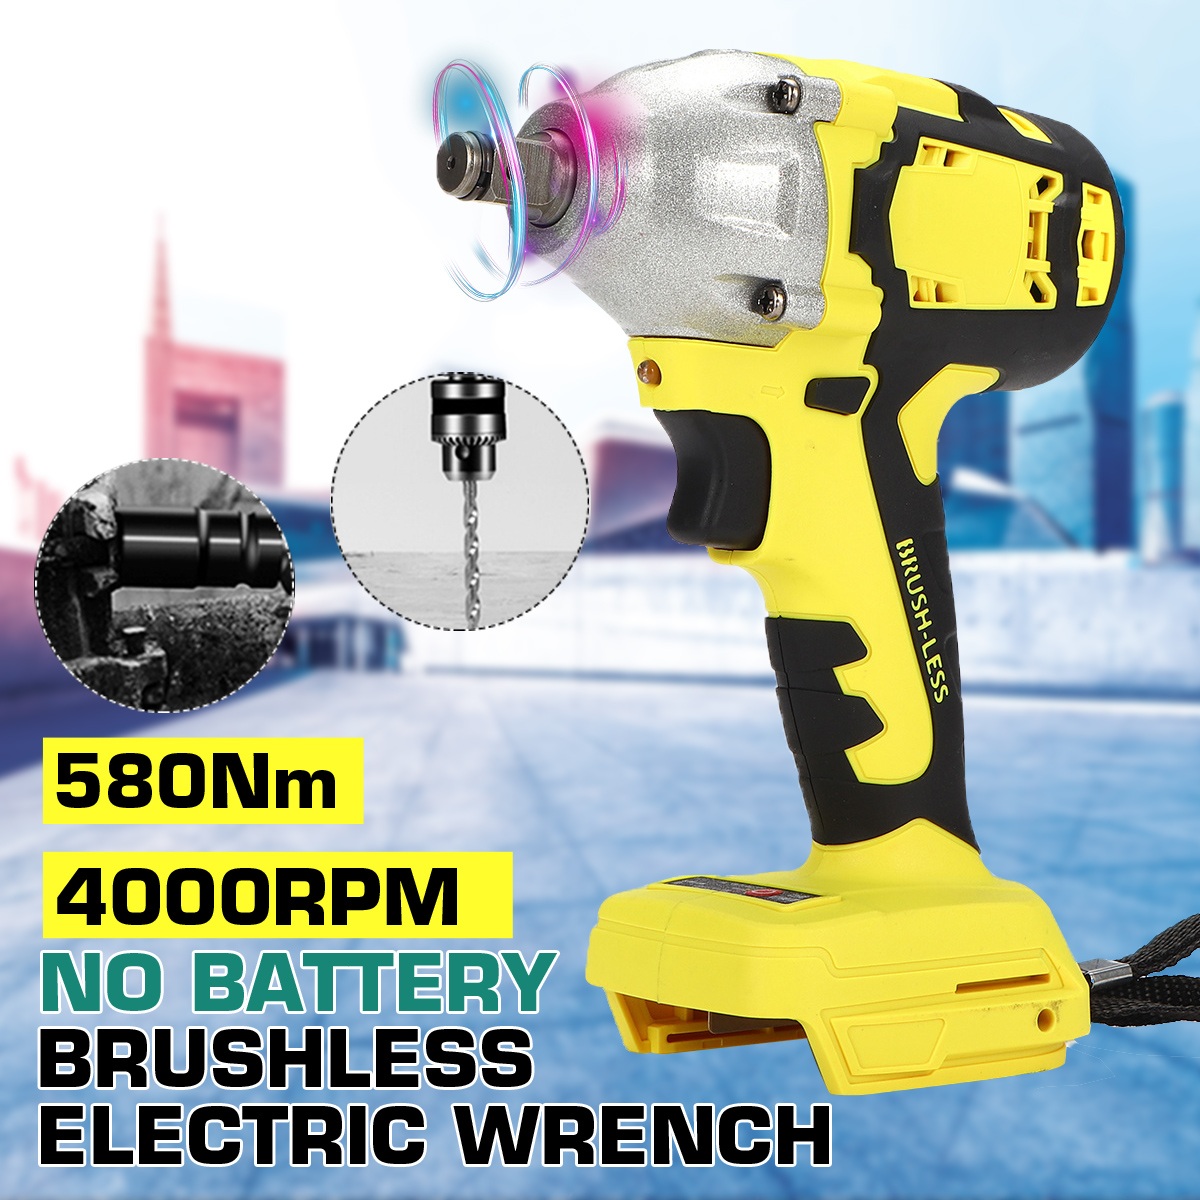 580Nm-4000rpm-LED-Cordless-Motor-Electric-Brushless-Impact-Wrench-for-DIY-General-Building-Engineeri-1610535-2